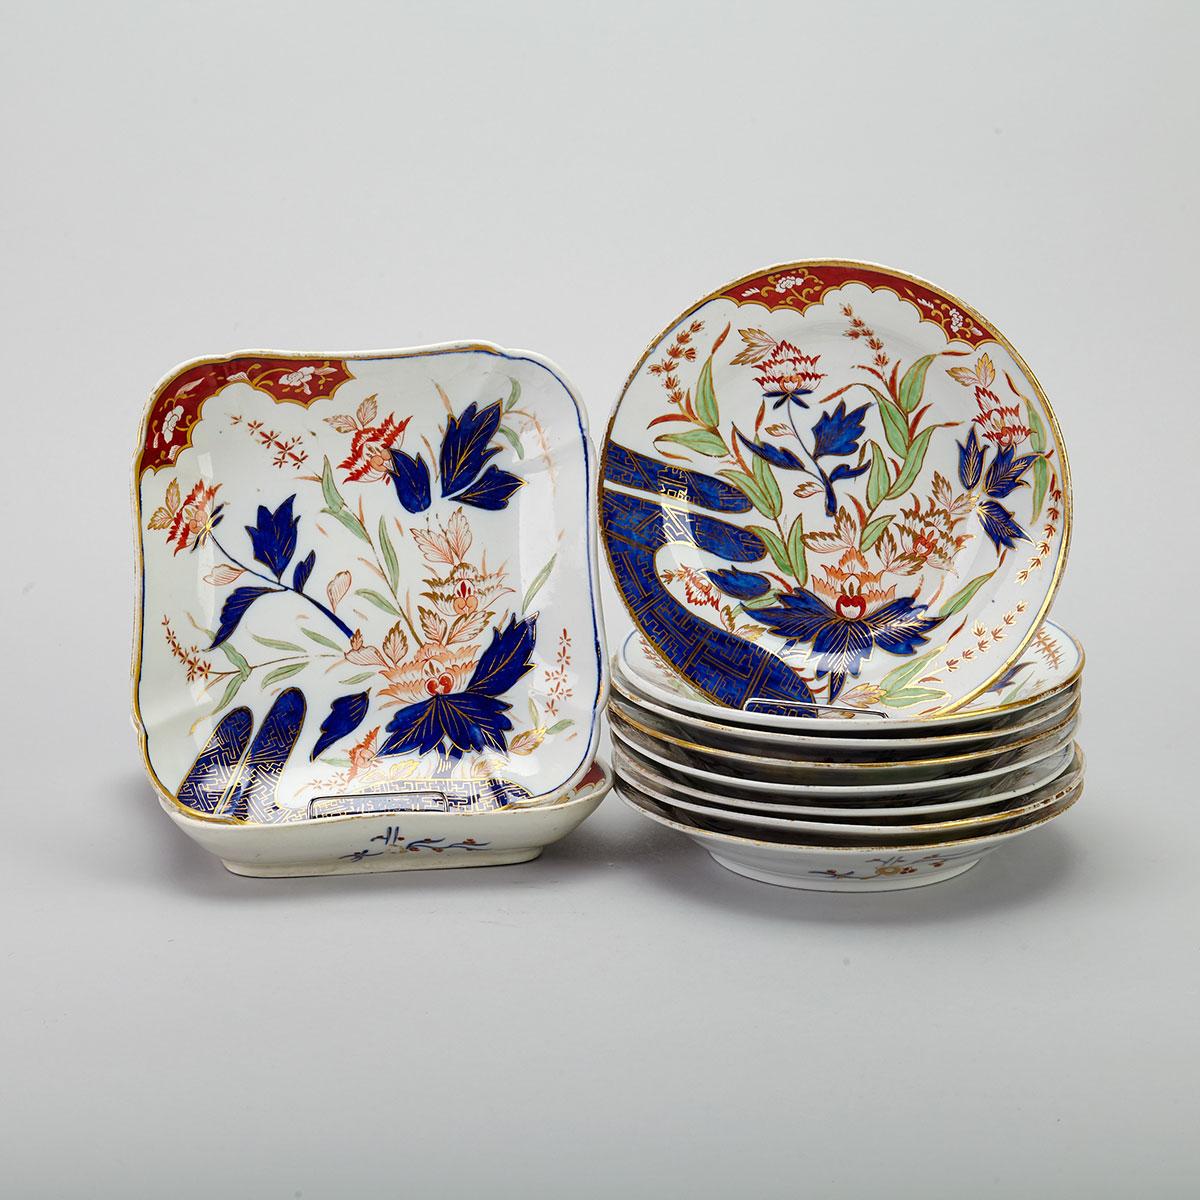 Eight English Porcelain Finger and Thumb Japan Pattern Plates and Two Square Dishes, early 19th century